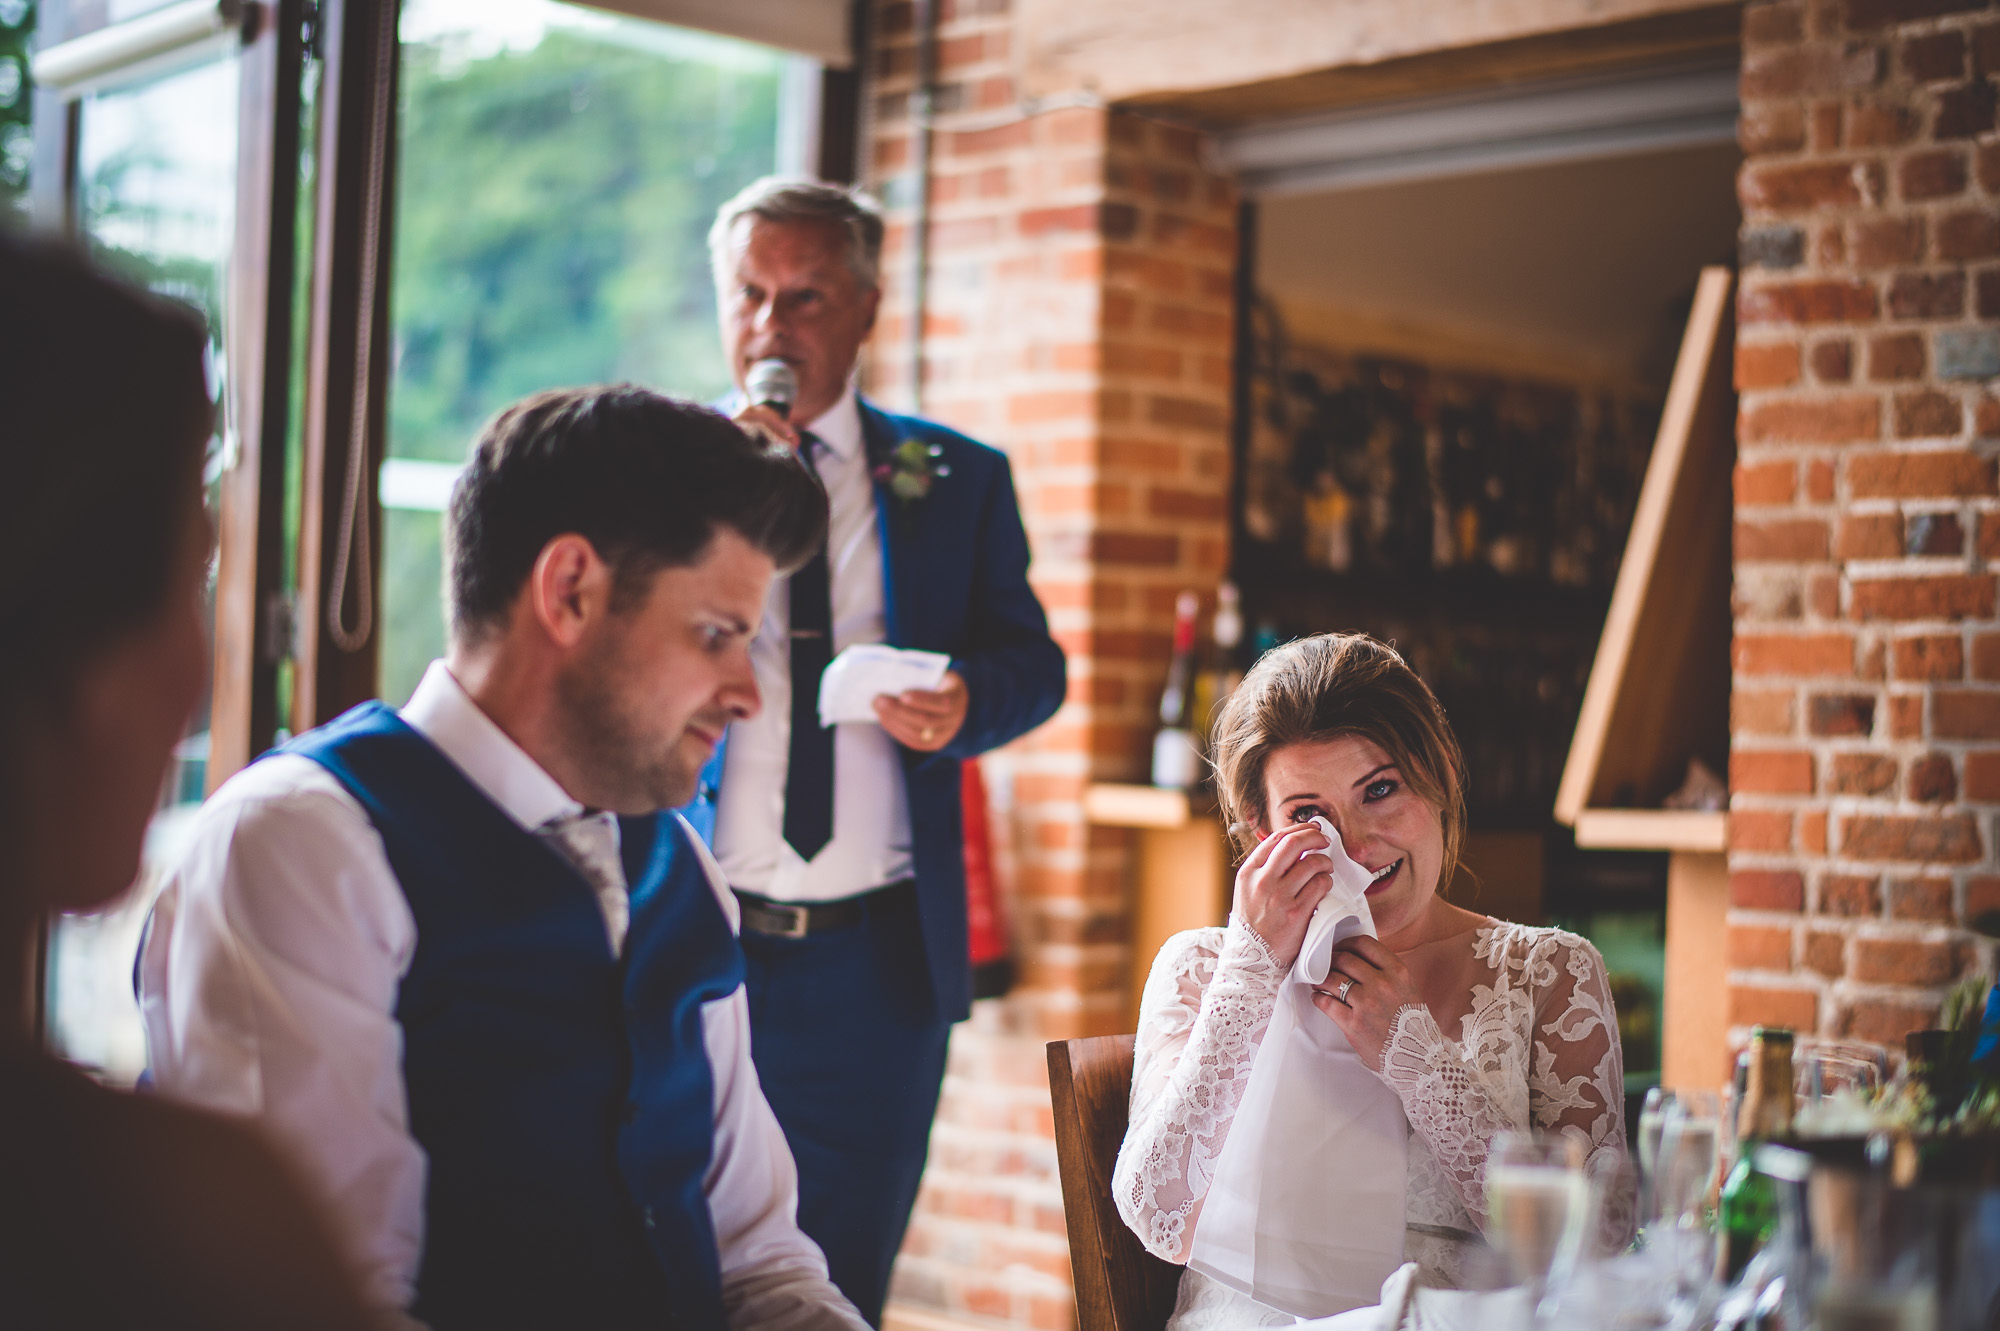 A bride, groom, and wedding photographer capture tears of joy during the wedding reception.